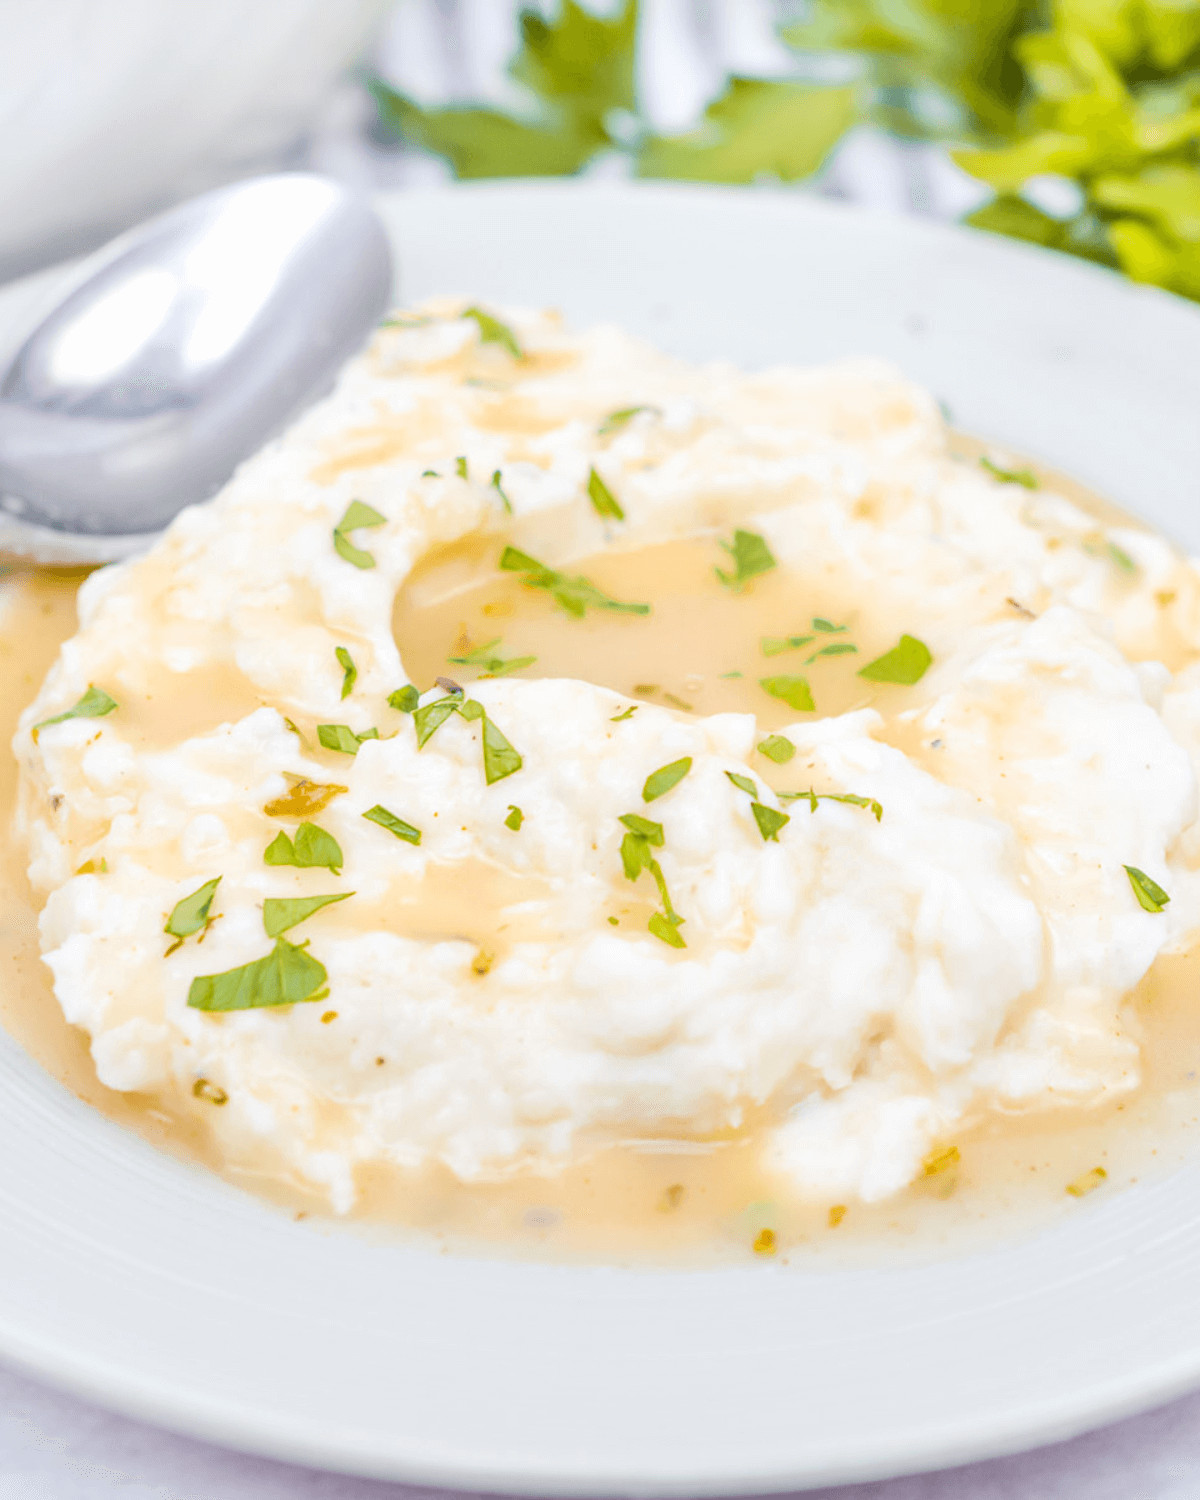 Mashed potatoes with turkey gravy without drippings on them.